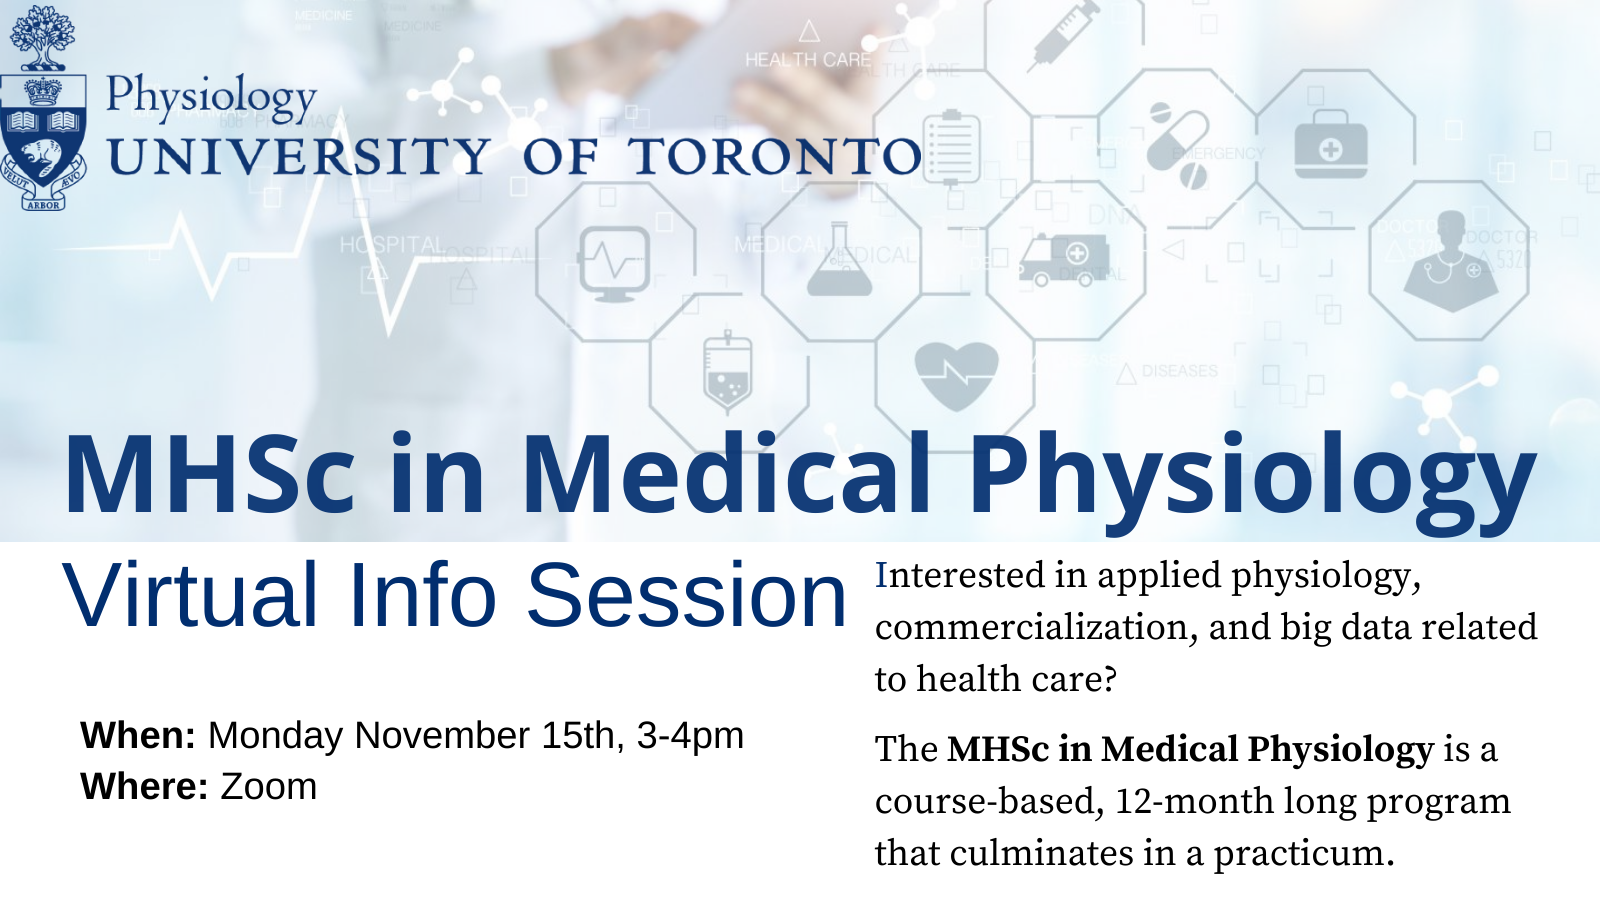 Ad for MHSc in Medical Physiology Info Session (same info as on site)